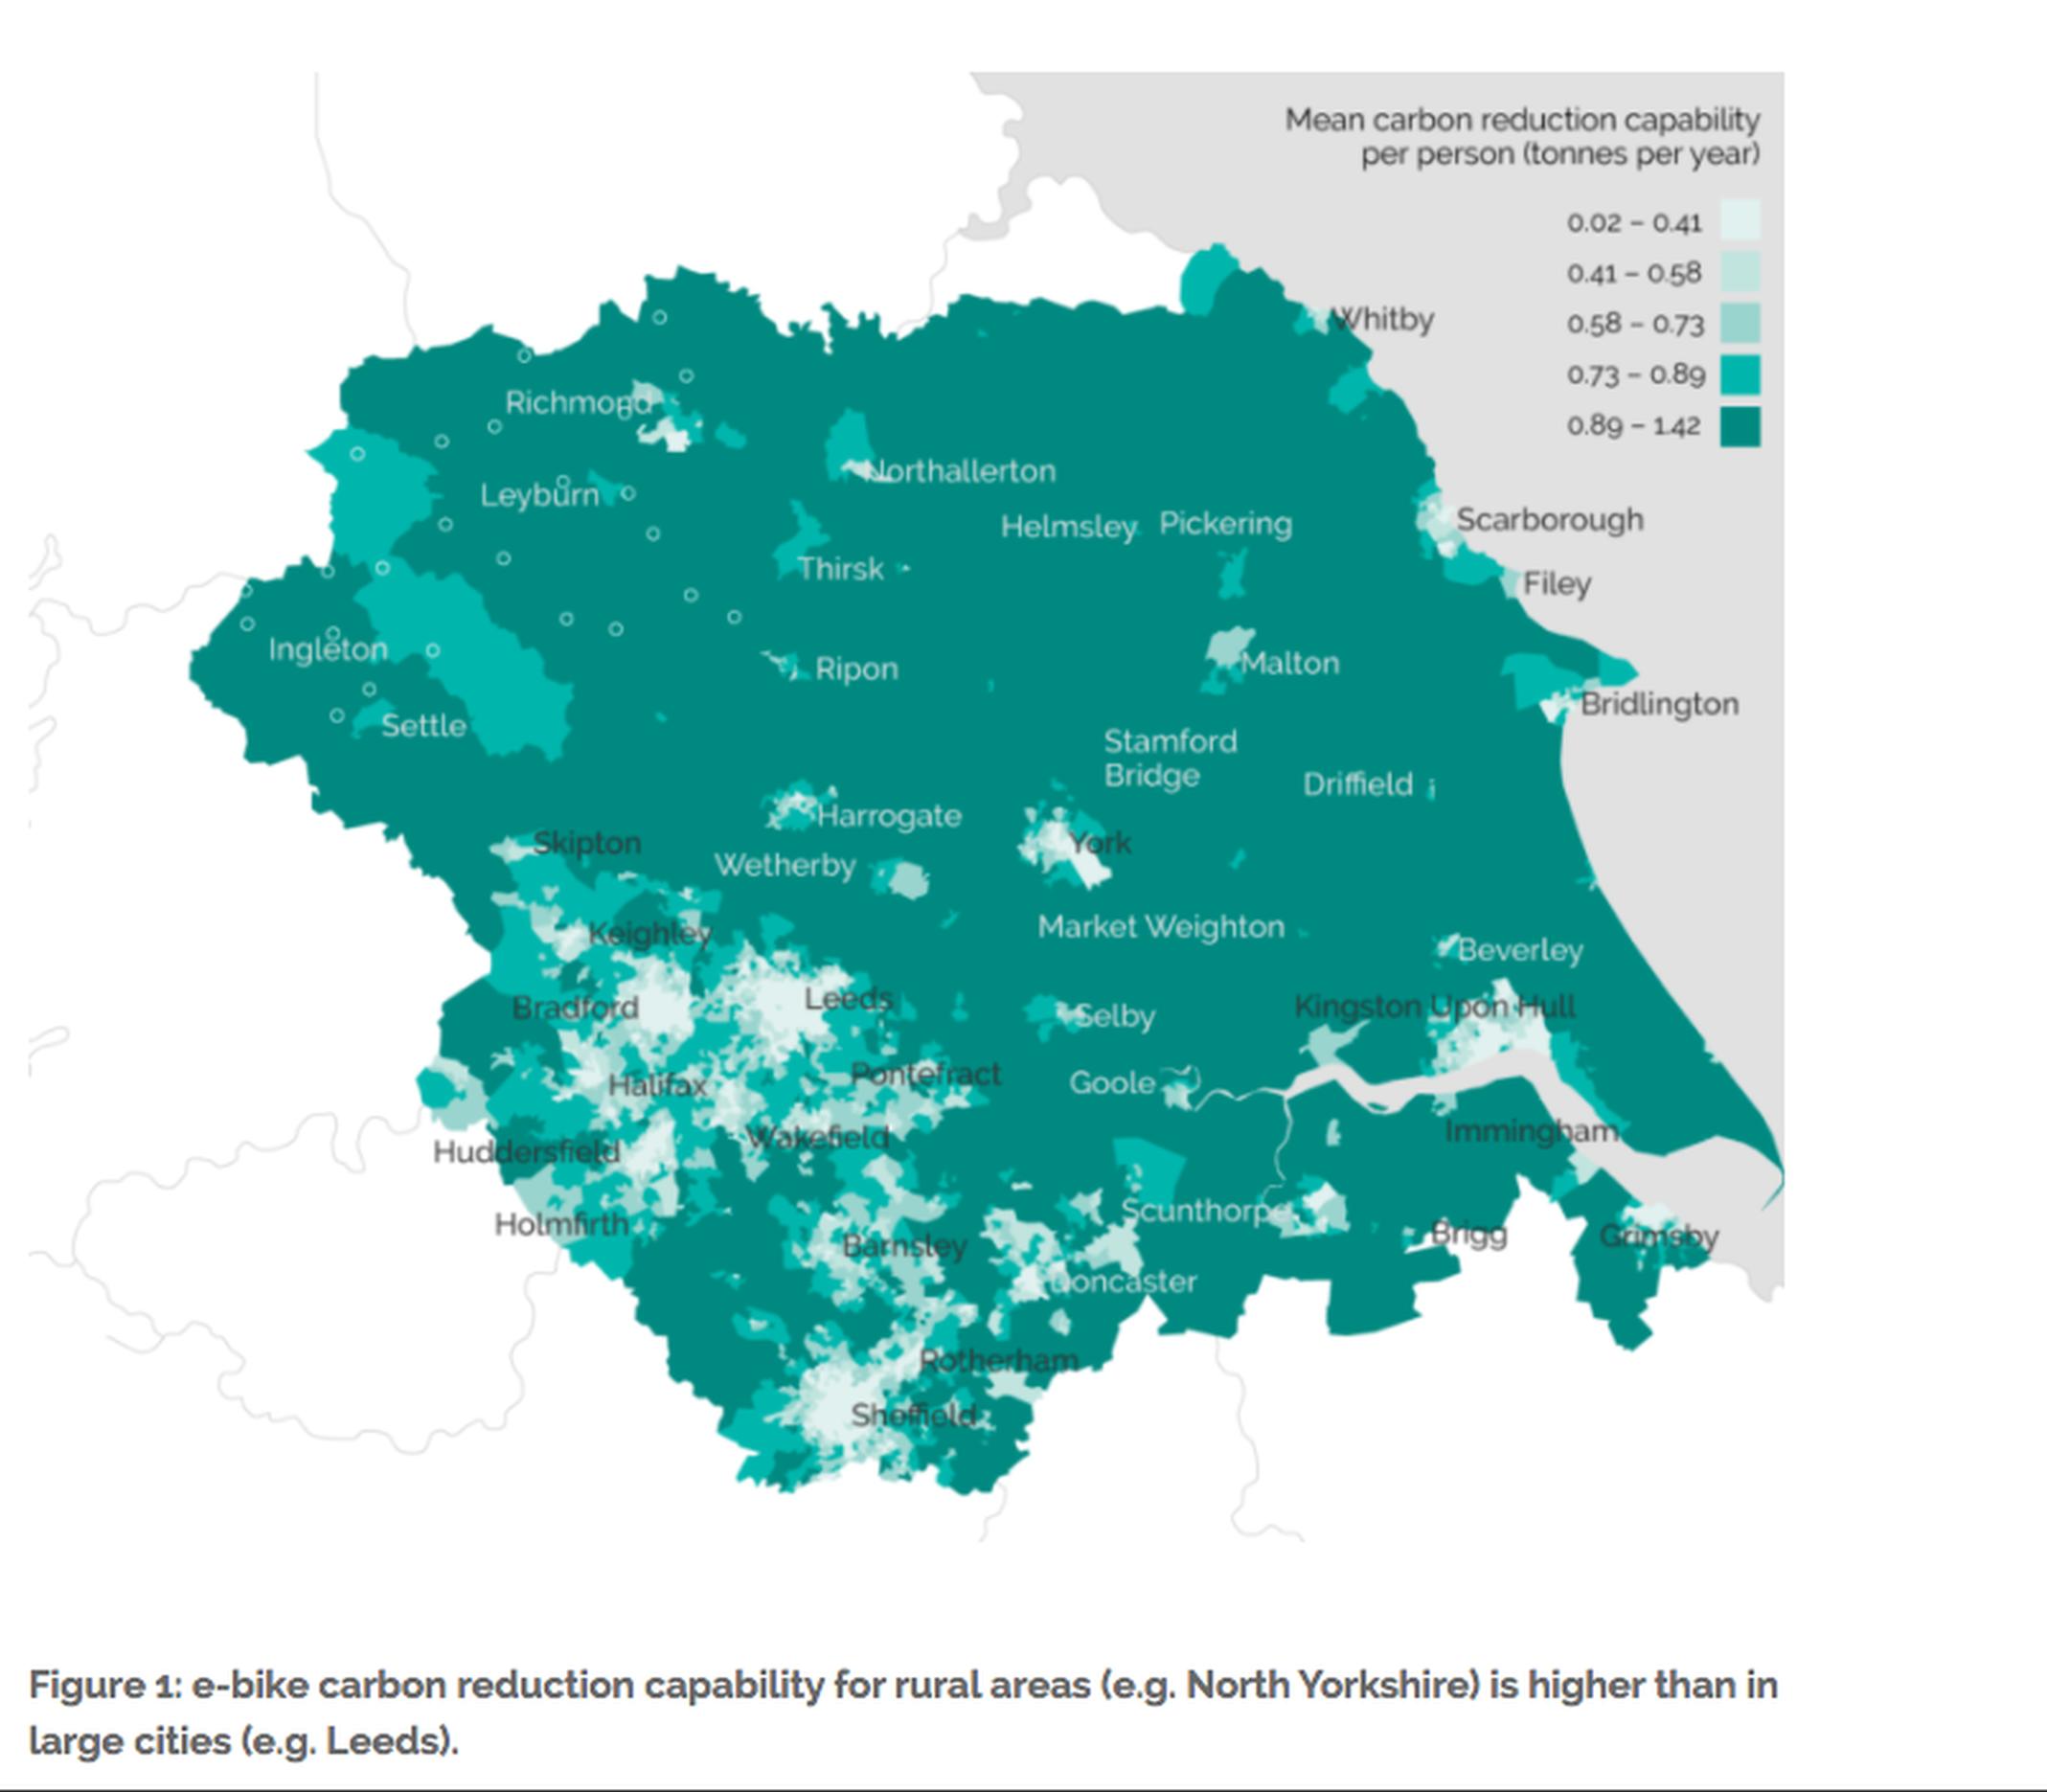 E-bike carbon reduction capability for rural areas (e.g. North Yorkshire) is higher than in large cities (e.g. Leeds)